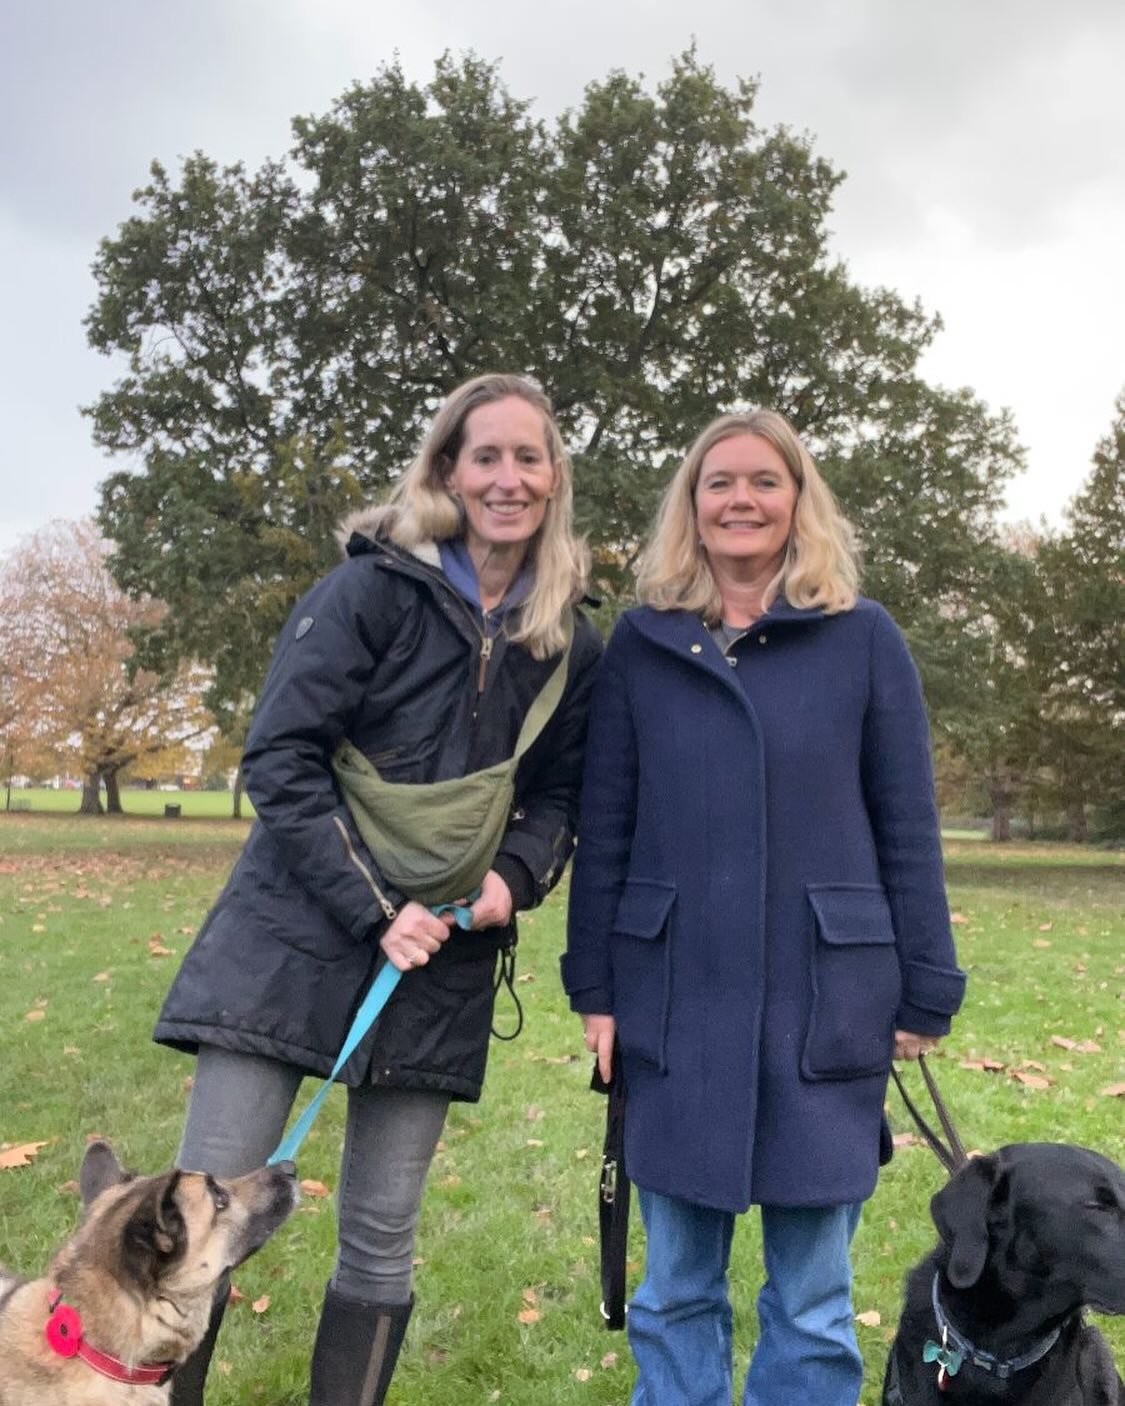 TREE WALK for DOG LOVERS
Saturday 27 April 10-11.15am 
 A tree walk with a difference: we&rsquo;d love your doggy companions to join us as we explore a few different areas of the Common. Led by Rebecca Byrne of Super Dog Trainers and Sarah Webley of 